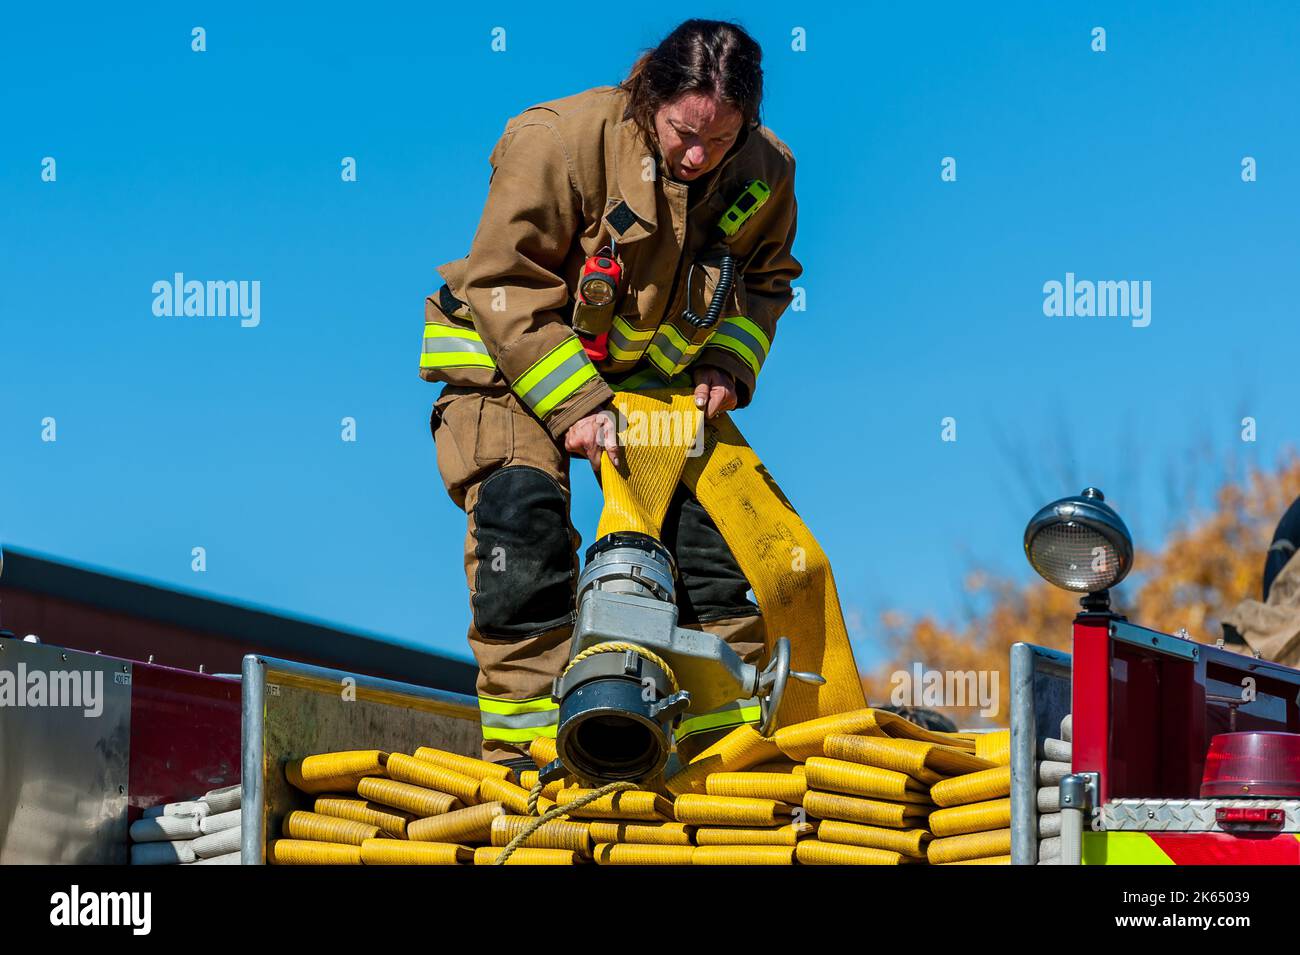 Acton, Massachusetts. 11th October, 2022. Acton Fire Department responding to fire at Sweet Tomatoes in Stop & Shop Plaza, Powdermill Road. Stock Photo